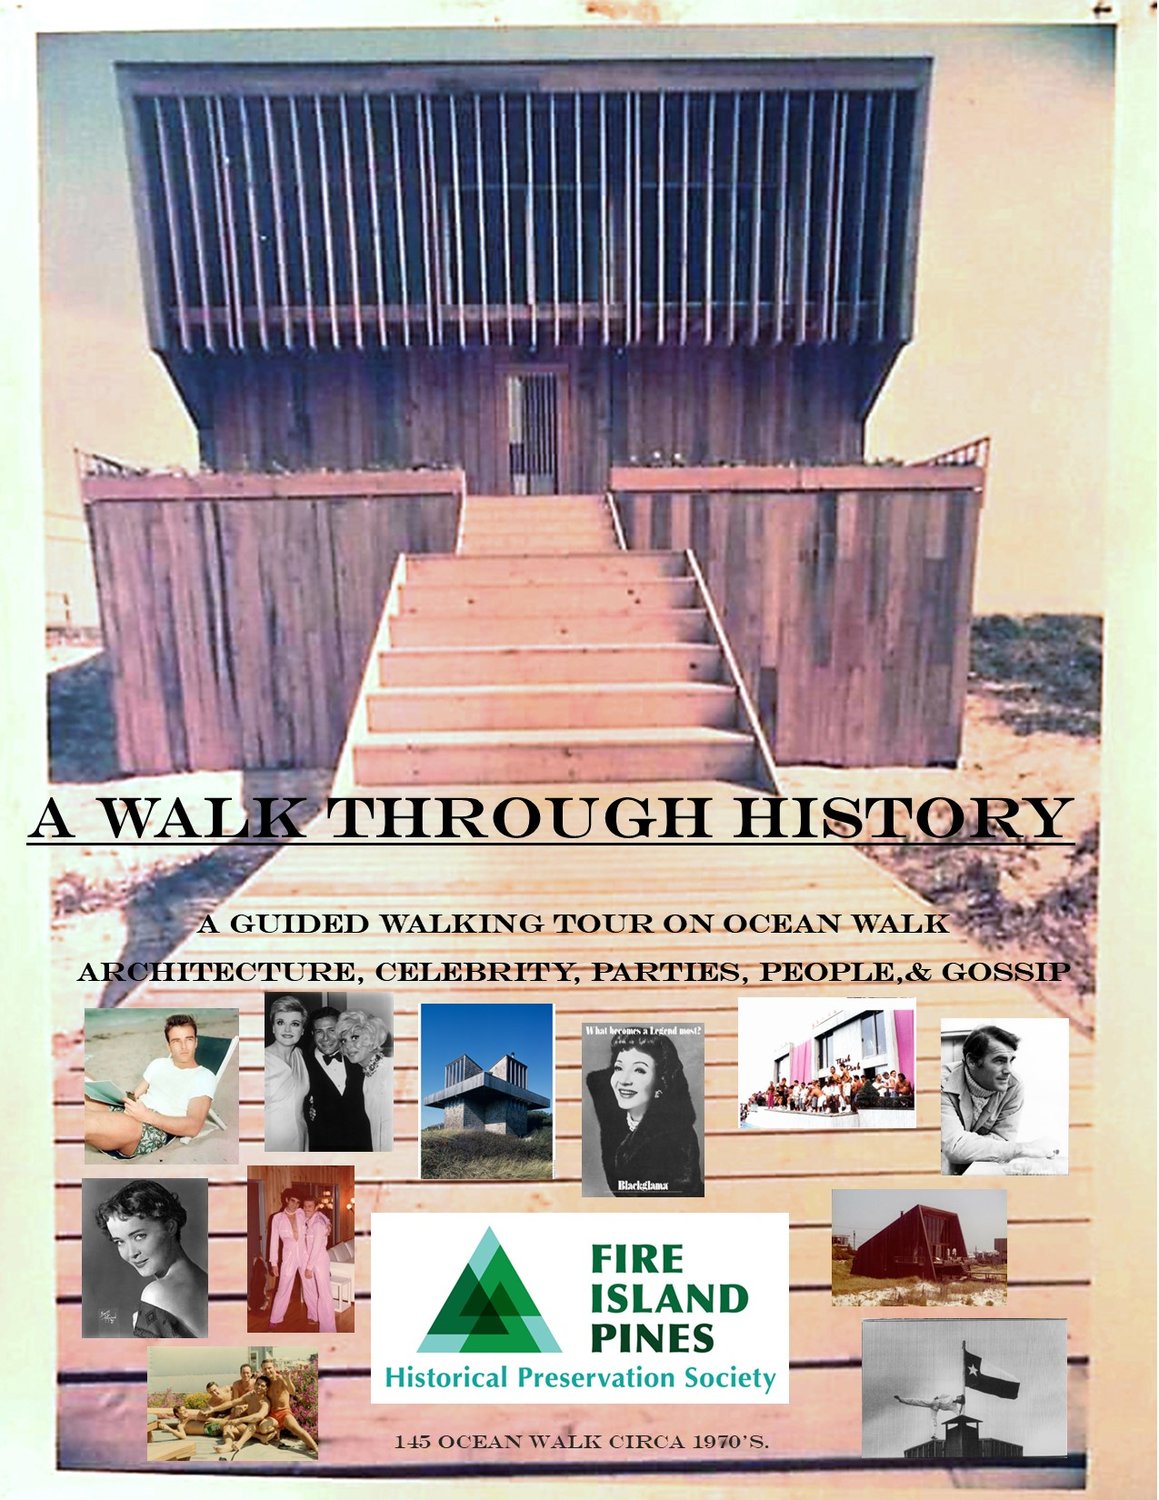 The popular Fire Island Pines Historical Preservation Society tour features a guided booklet for attendees.